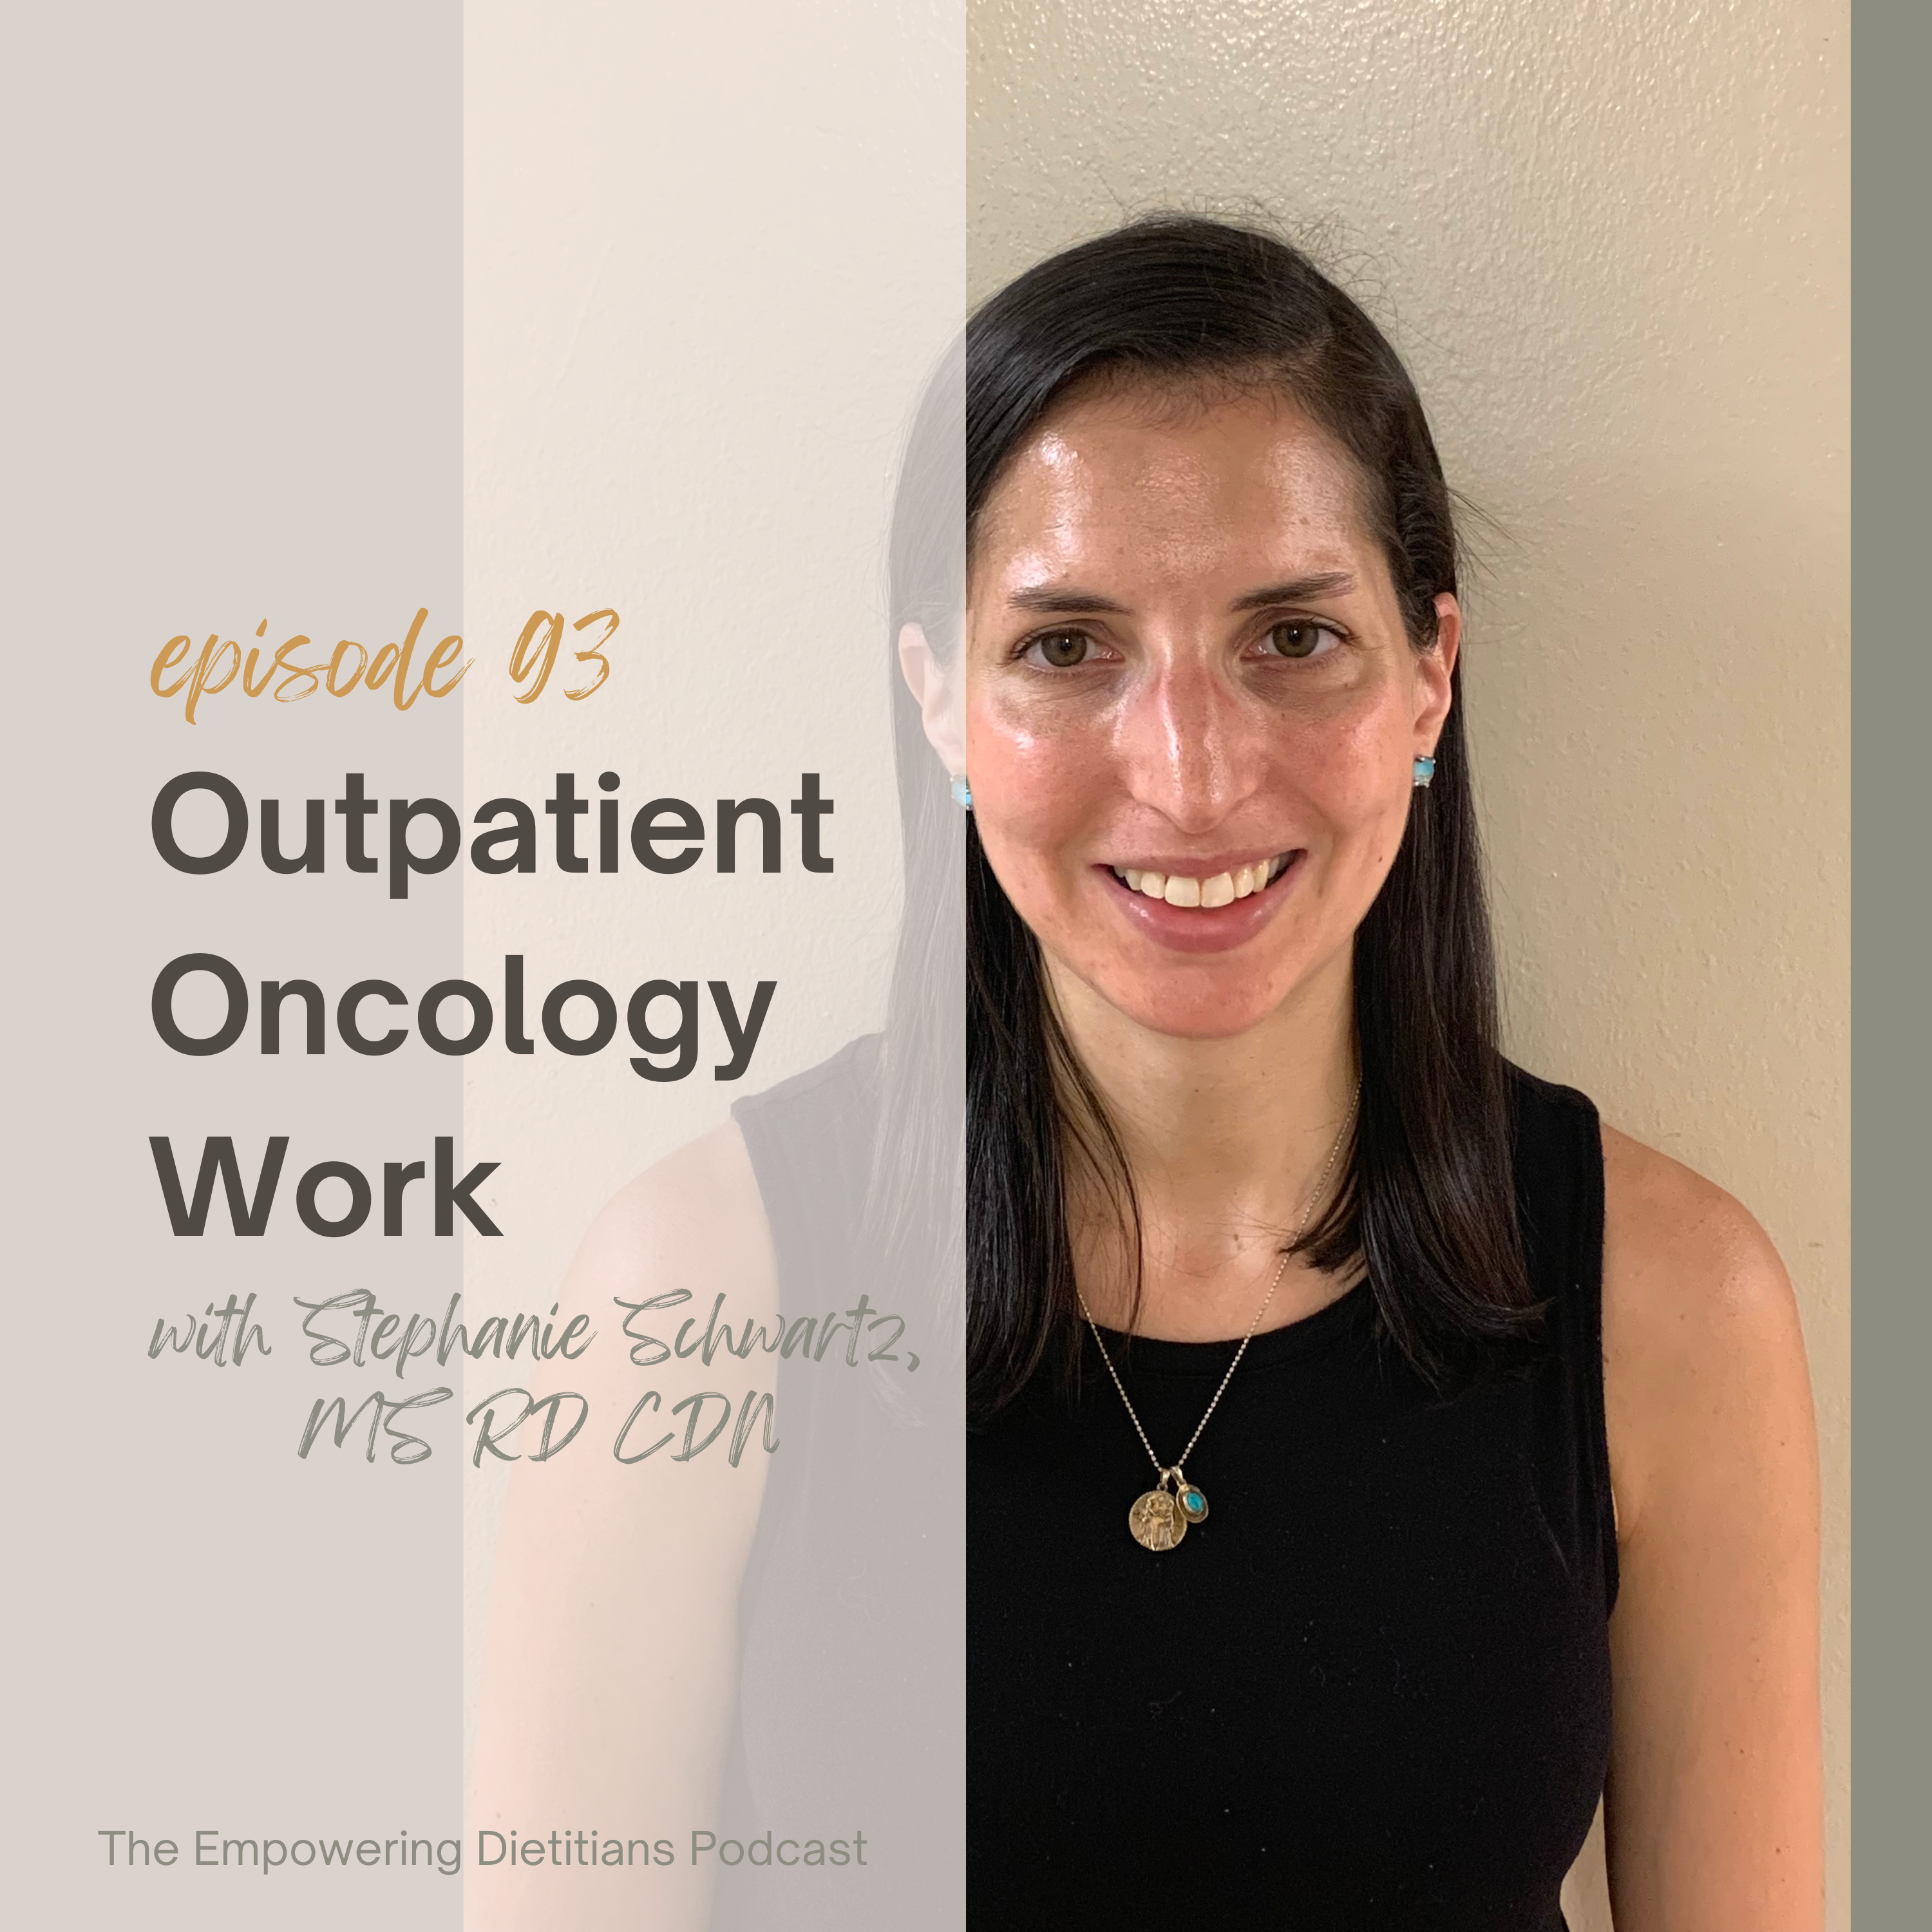 outpatient oncology work with stephanie schwartz